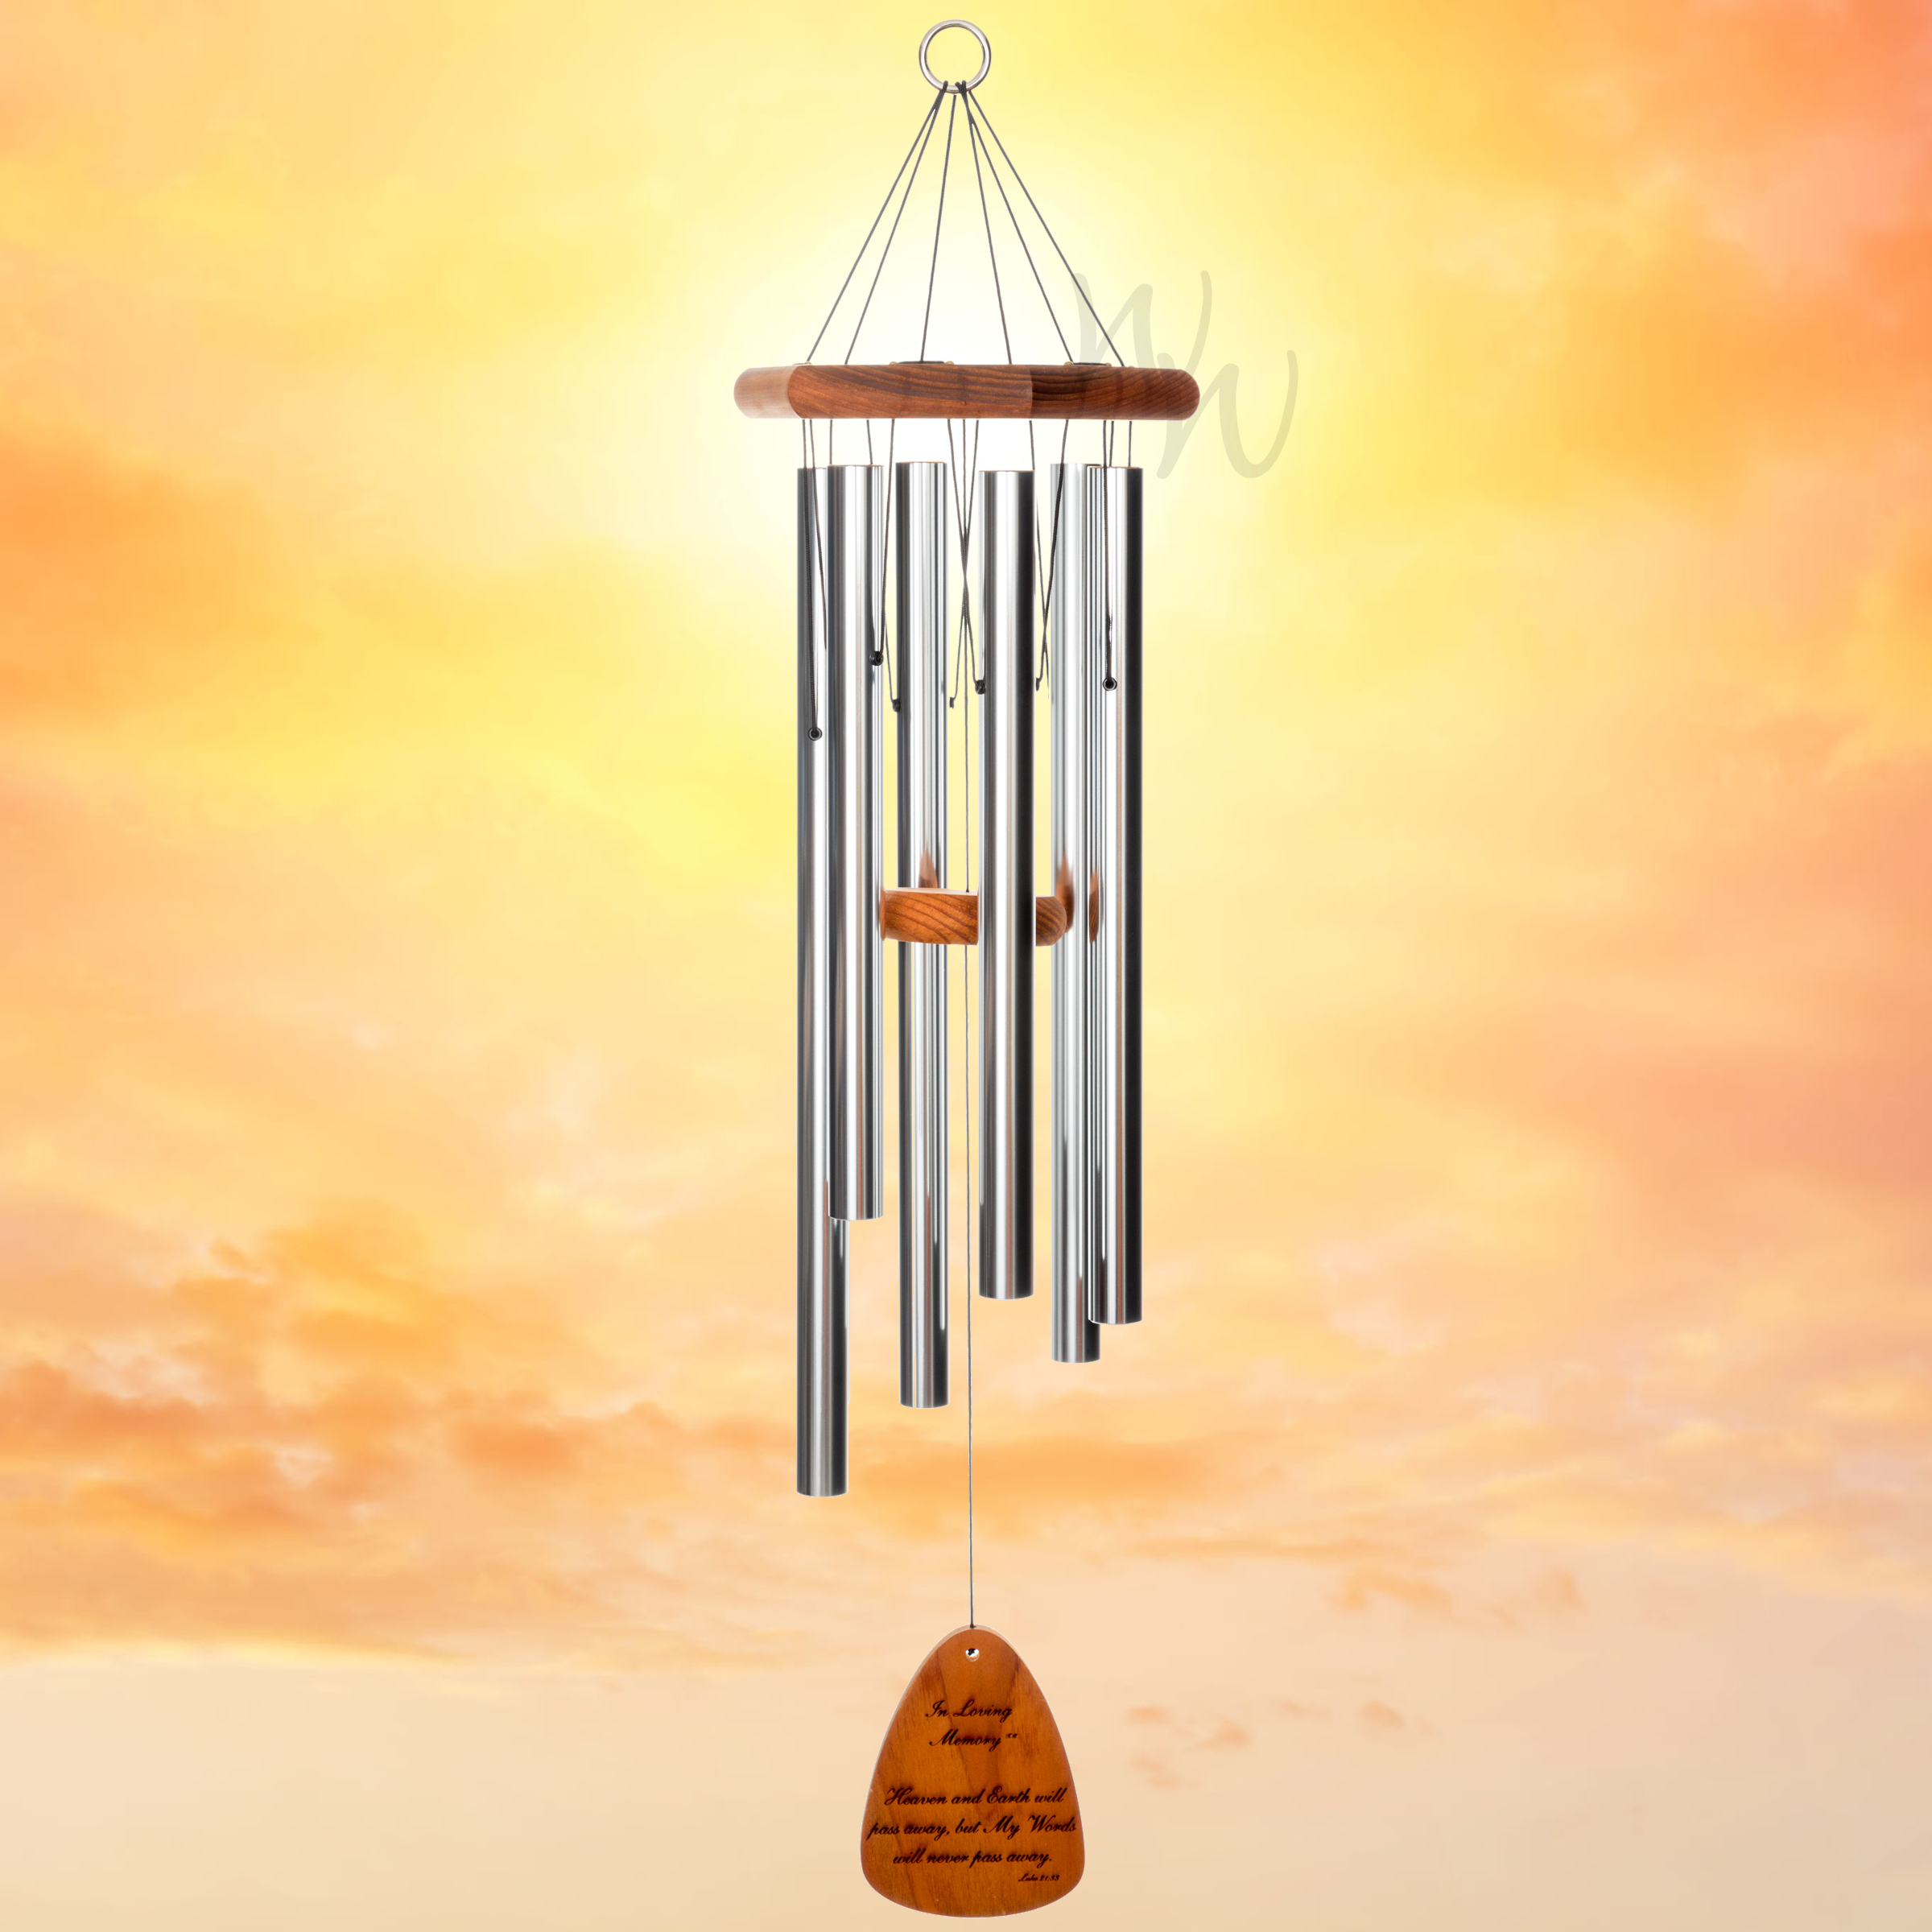 In Loving Memory 35 Inch Windchime - My Words will never pass away... in Sliver